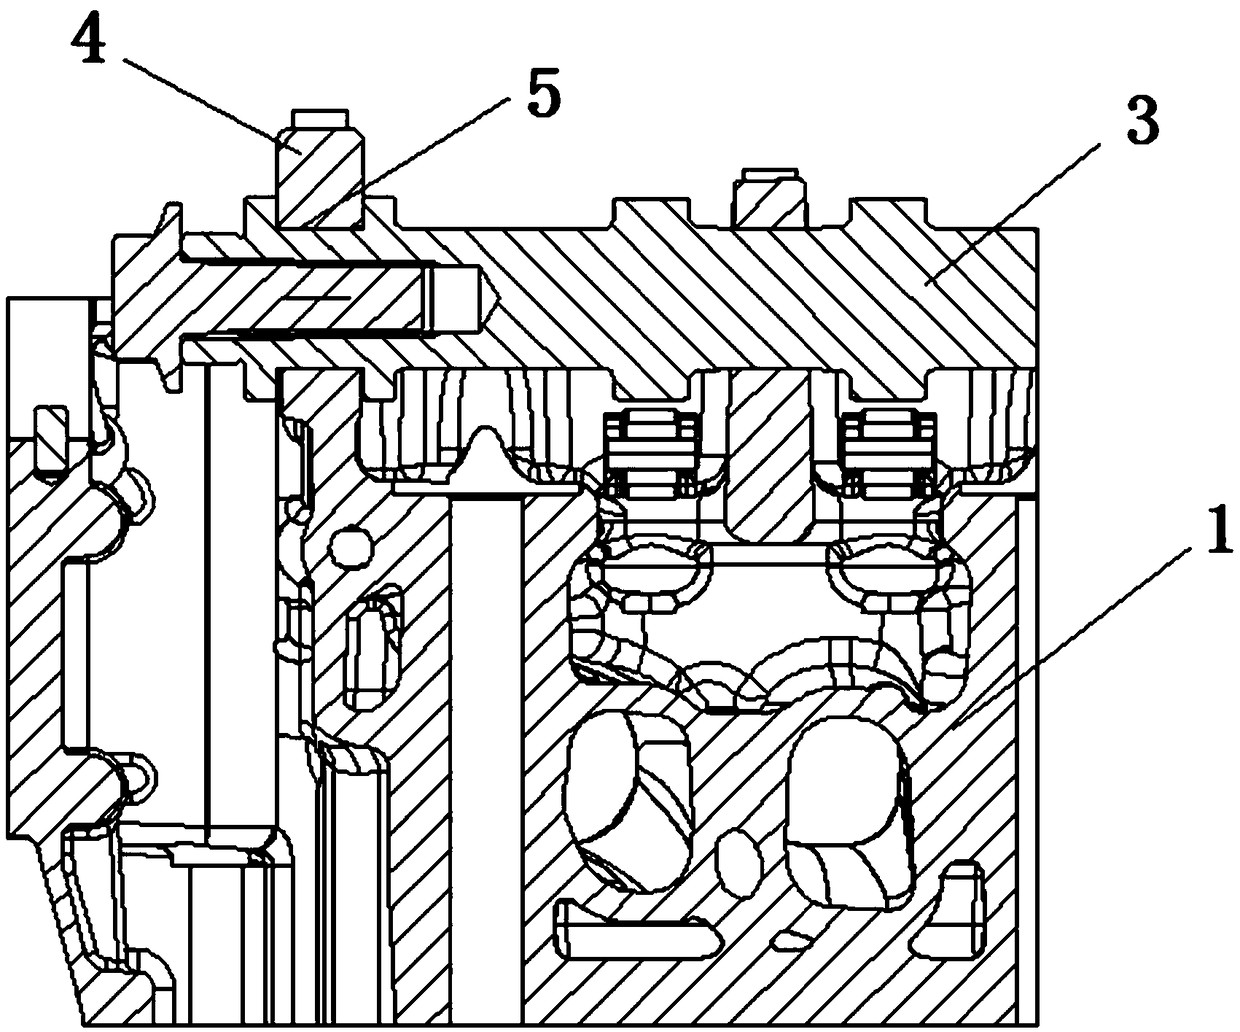 Camshaft bearing cover thrust structure